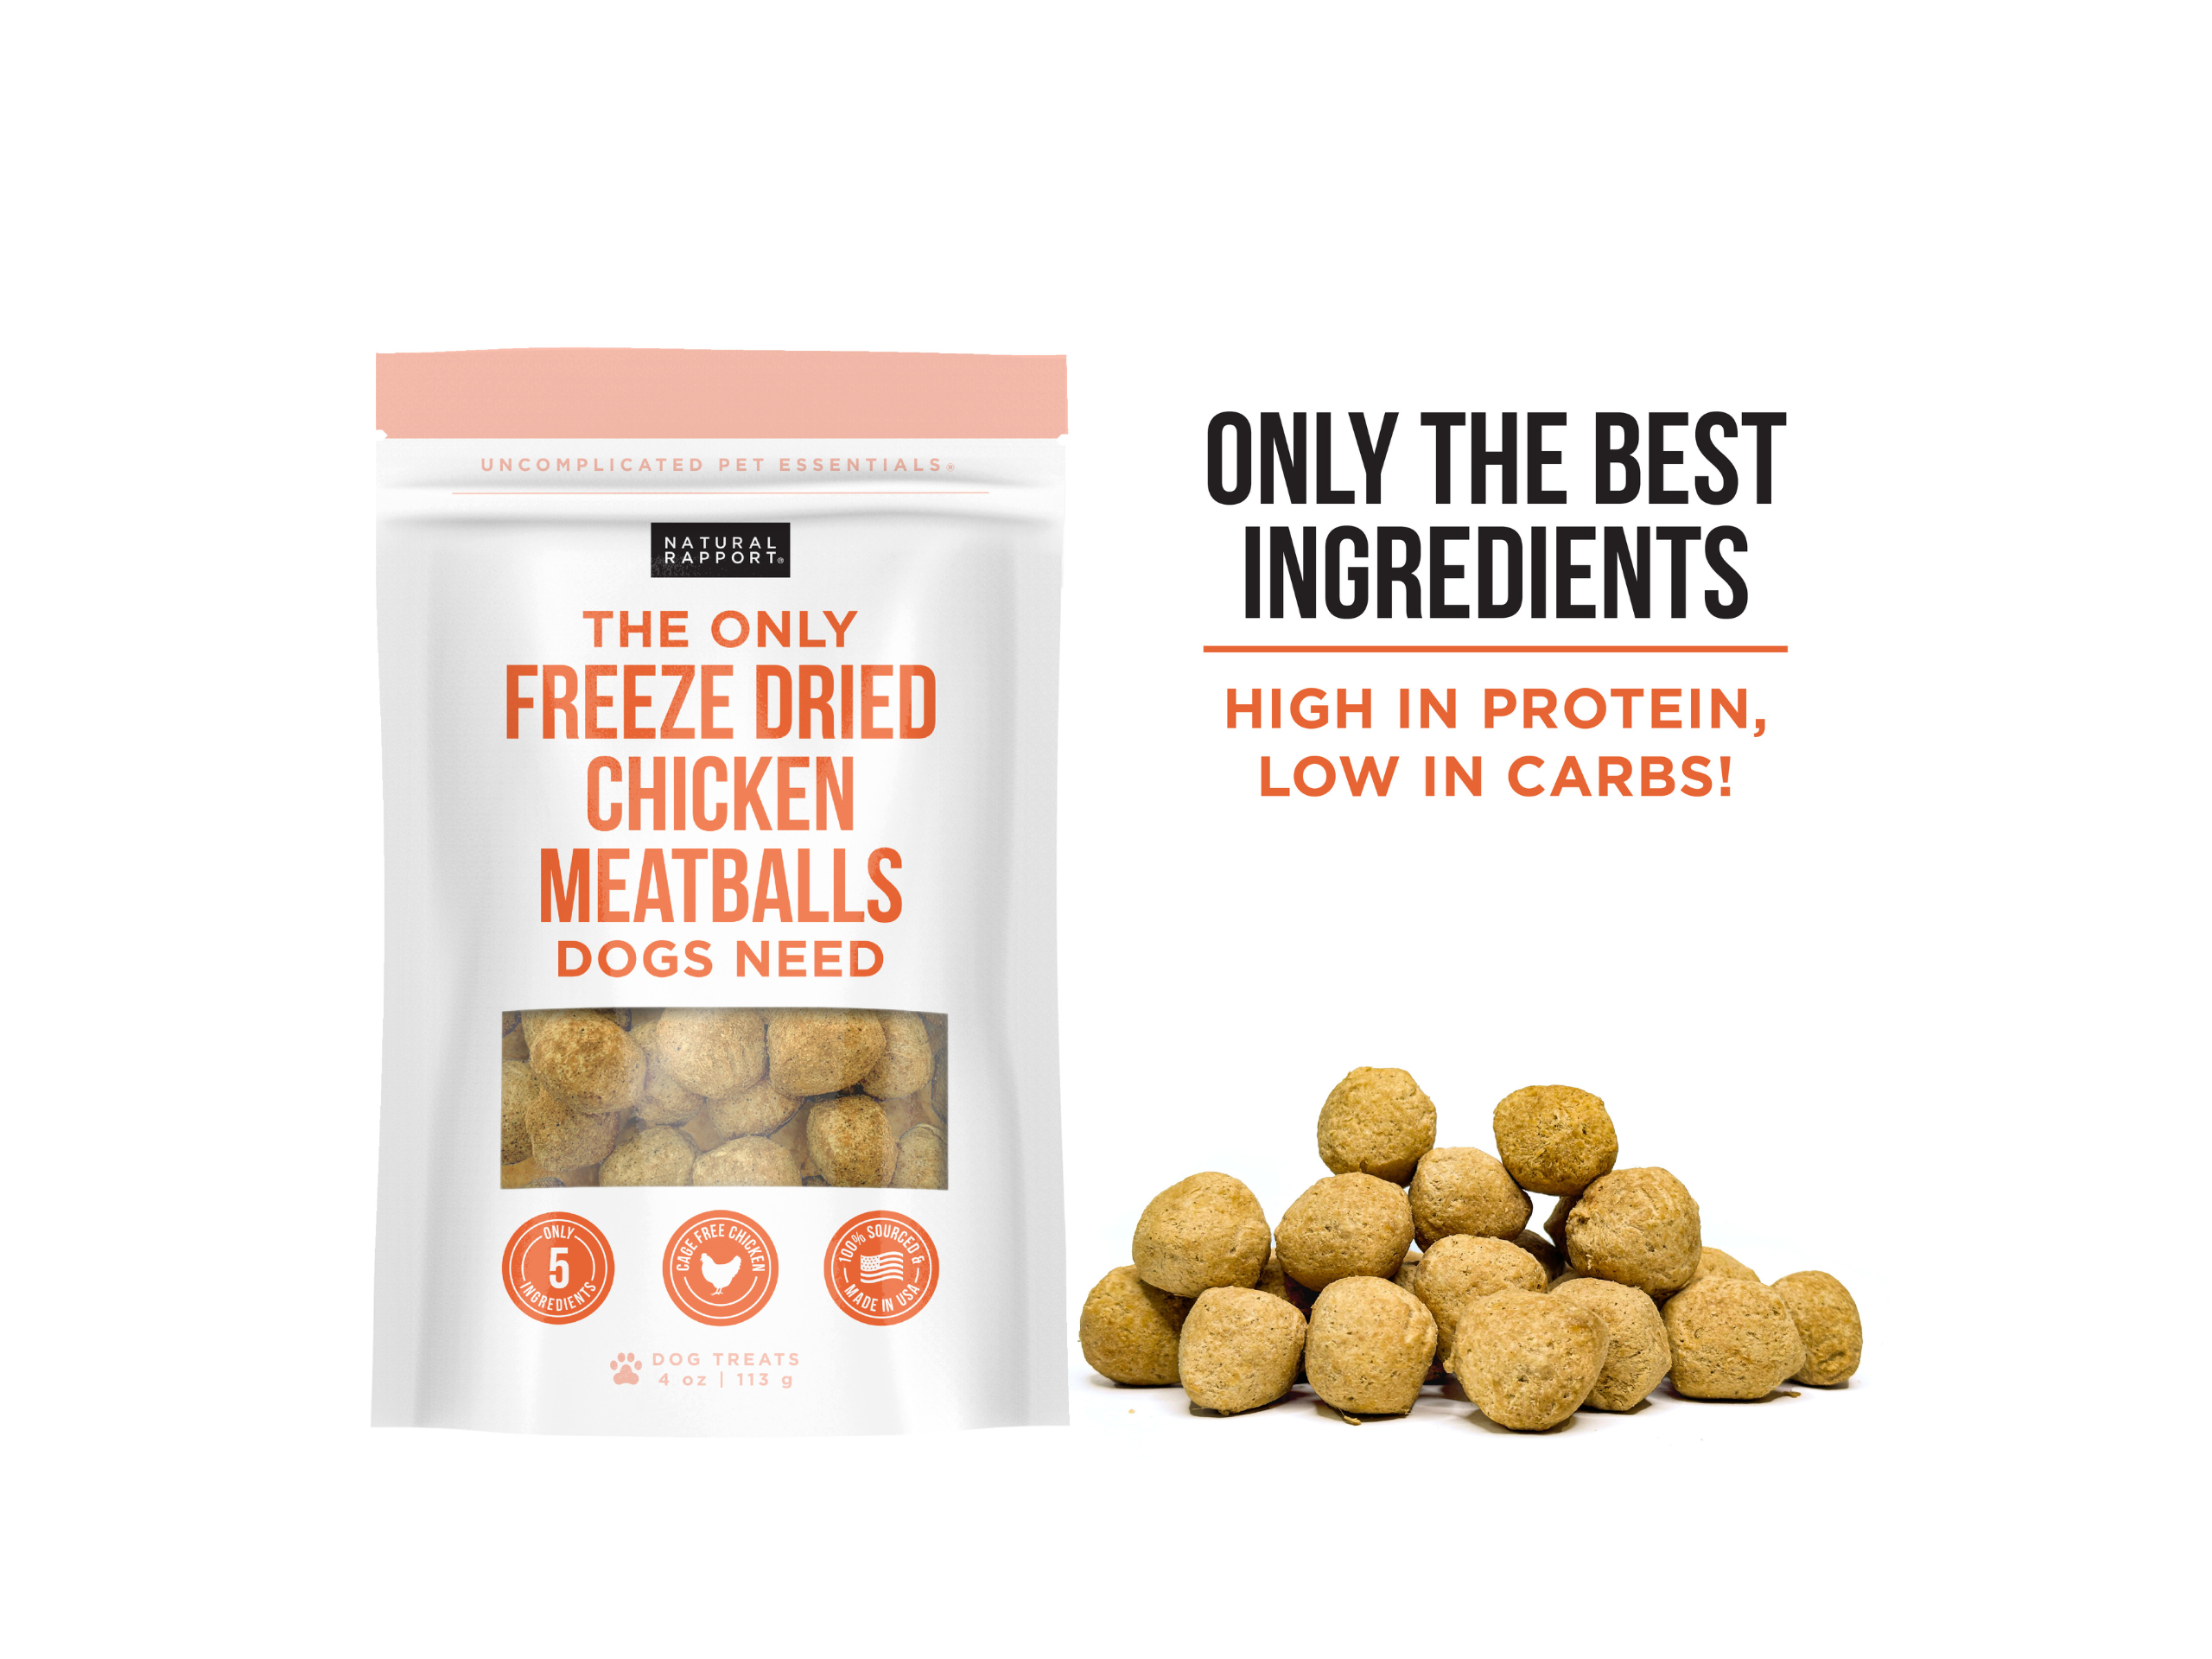 Natural Rapport - The Only Freeze Dried Chicken Meatballs Dogs Need